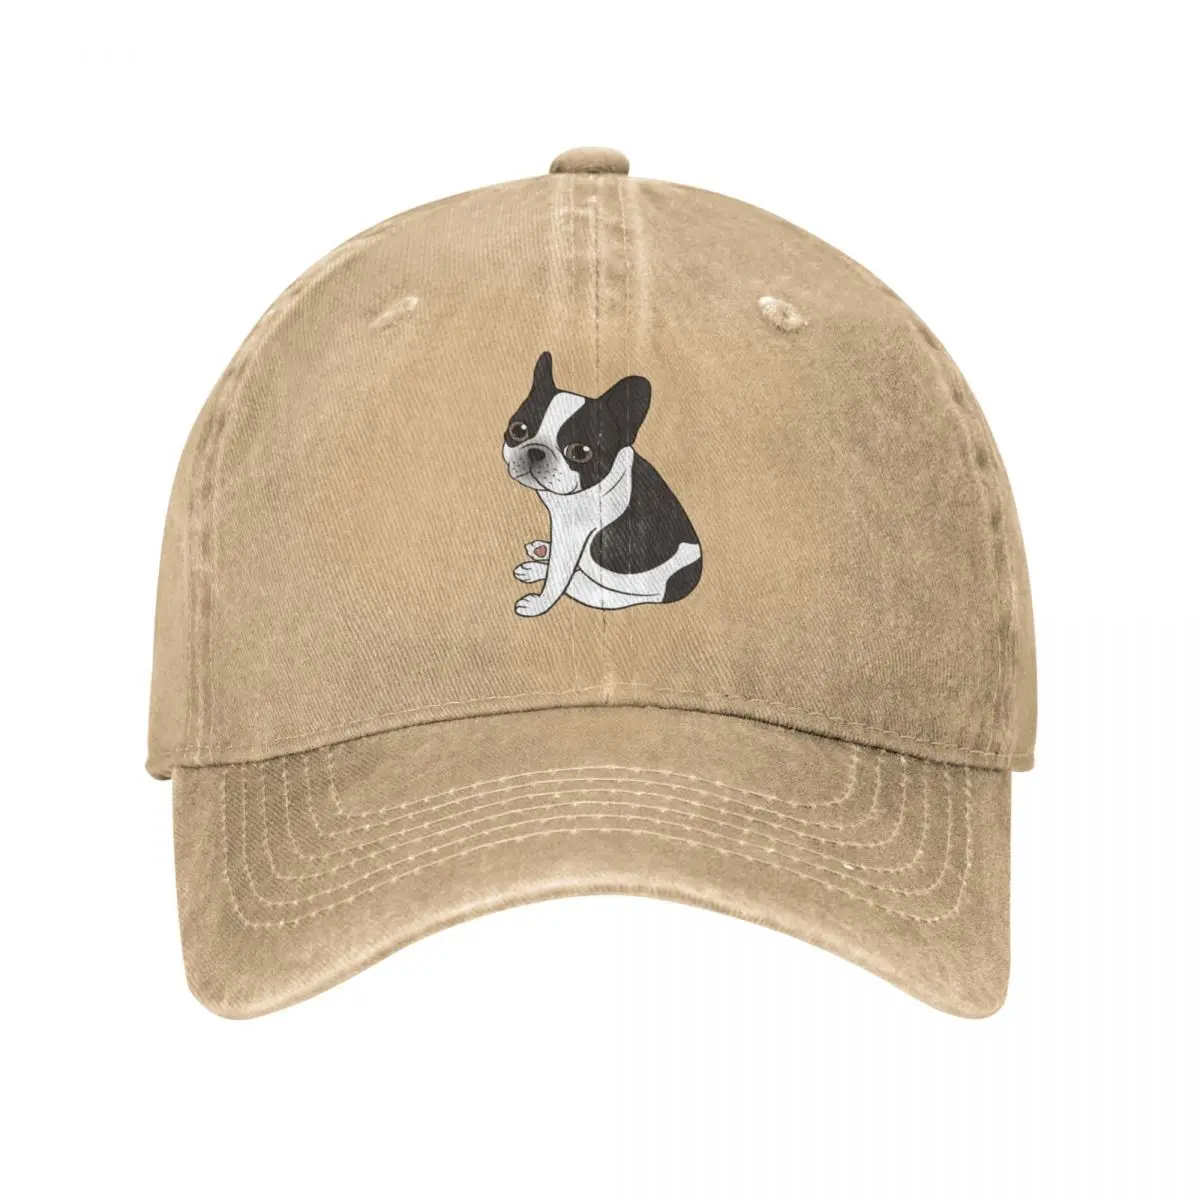 

Say Hello To The Cute Double Hooded Pied French Bulldog Dog Baseball Caps Distressed Washed Snapback Hat Activities Hats Cap